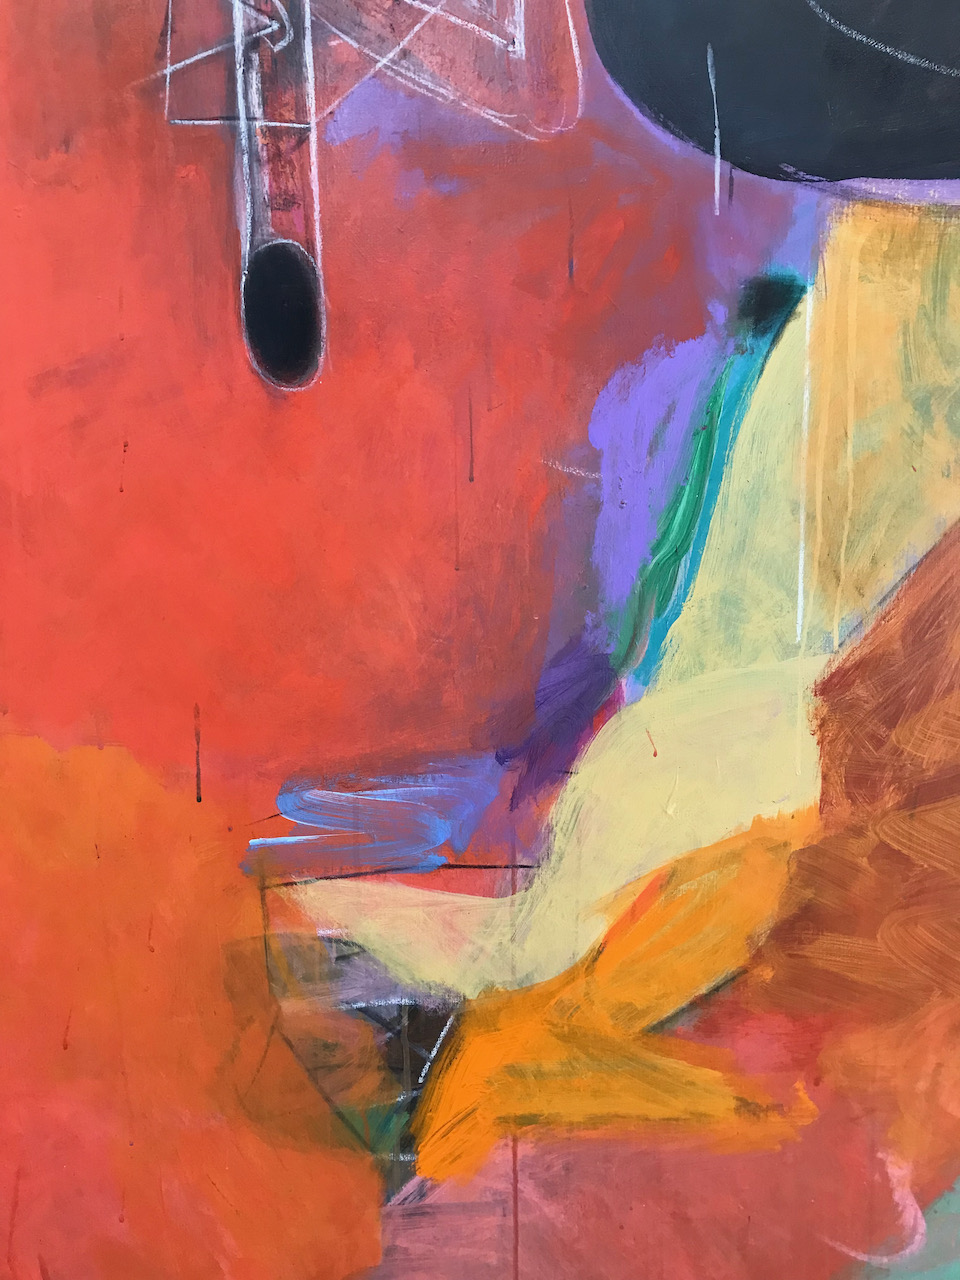 A close-up of one of Pomar's paintings – abstract and gestural, in warm colours.